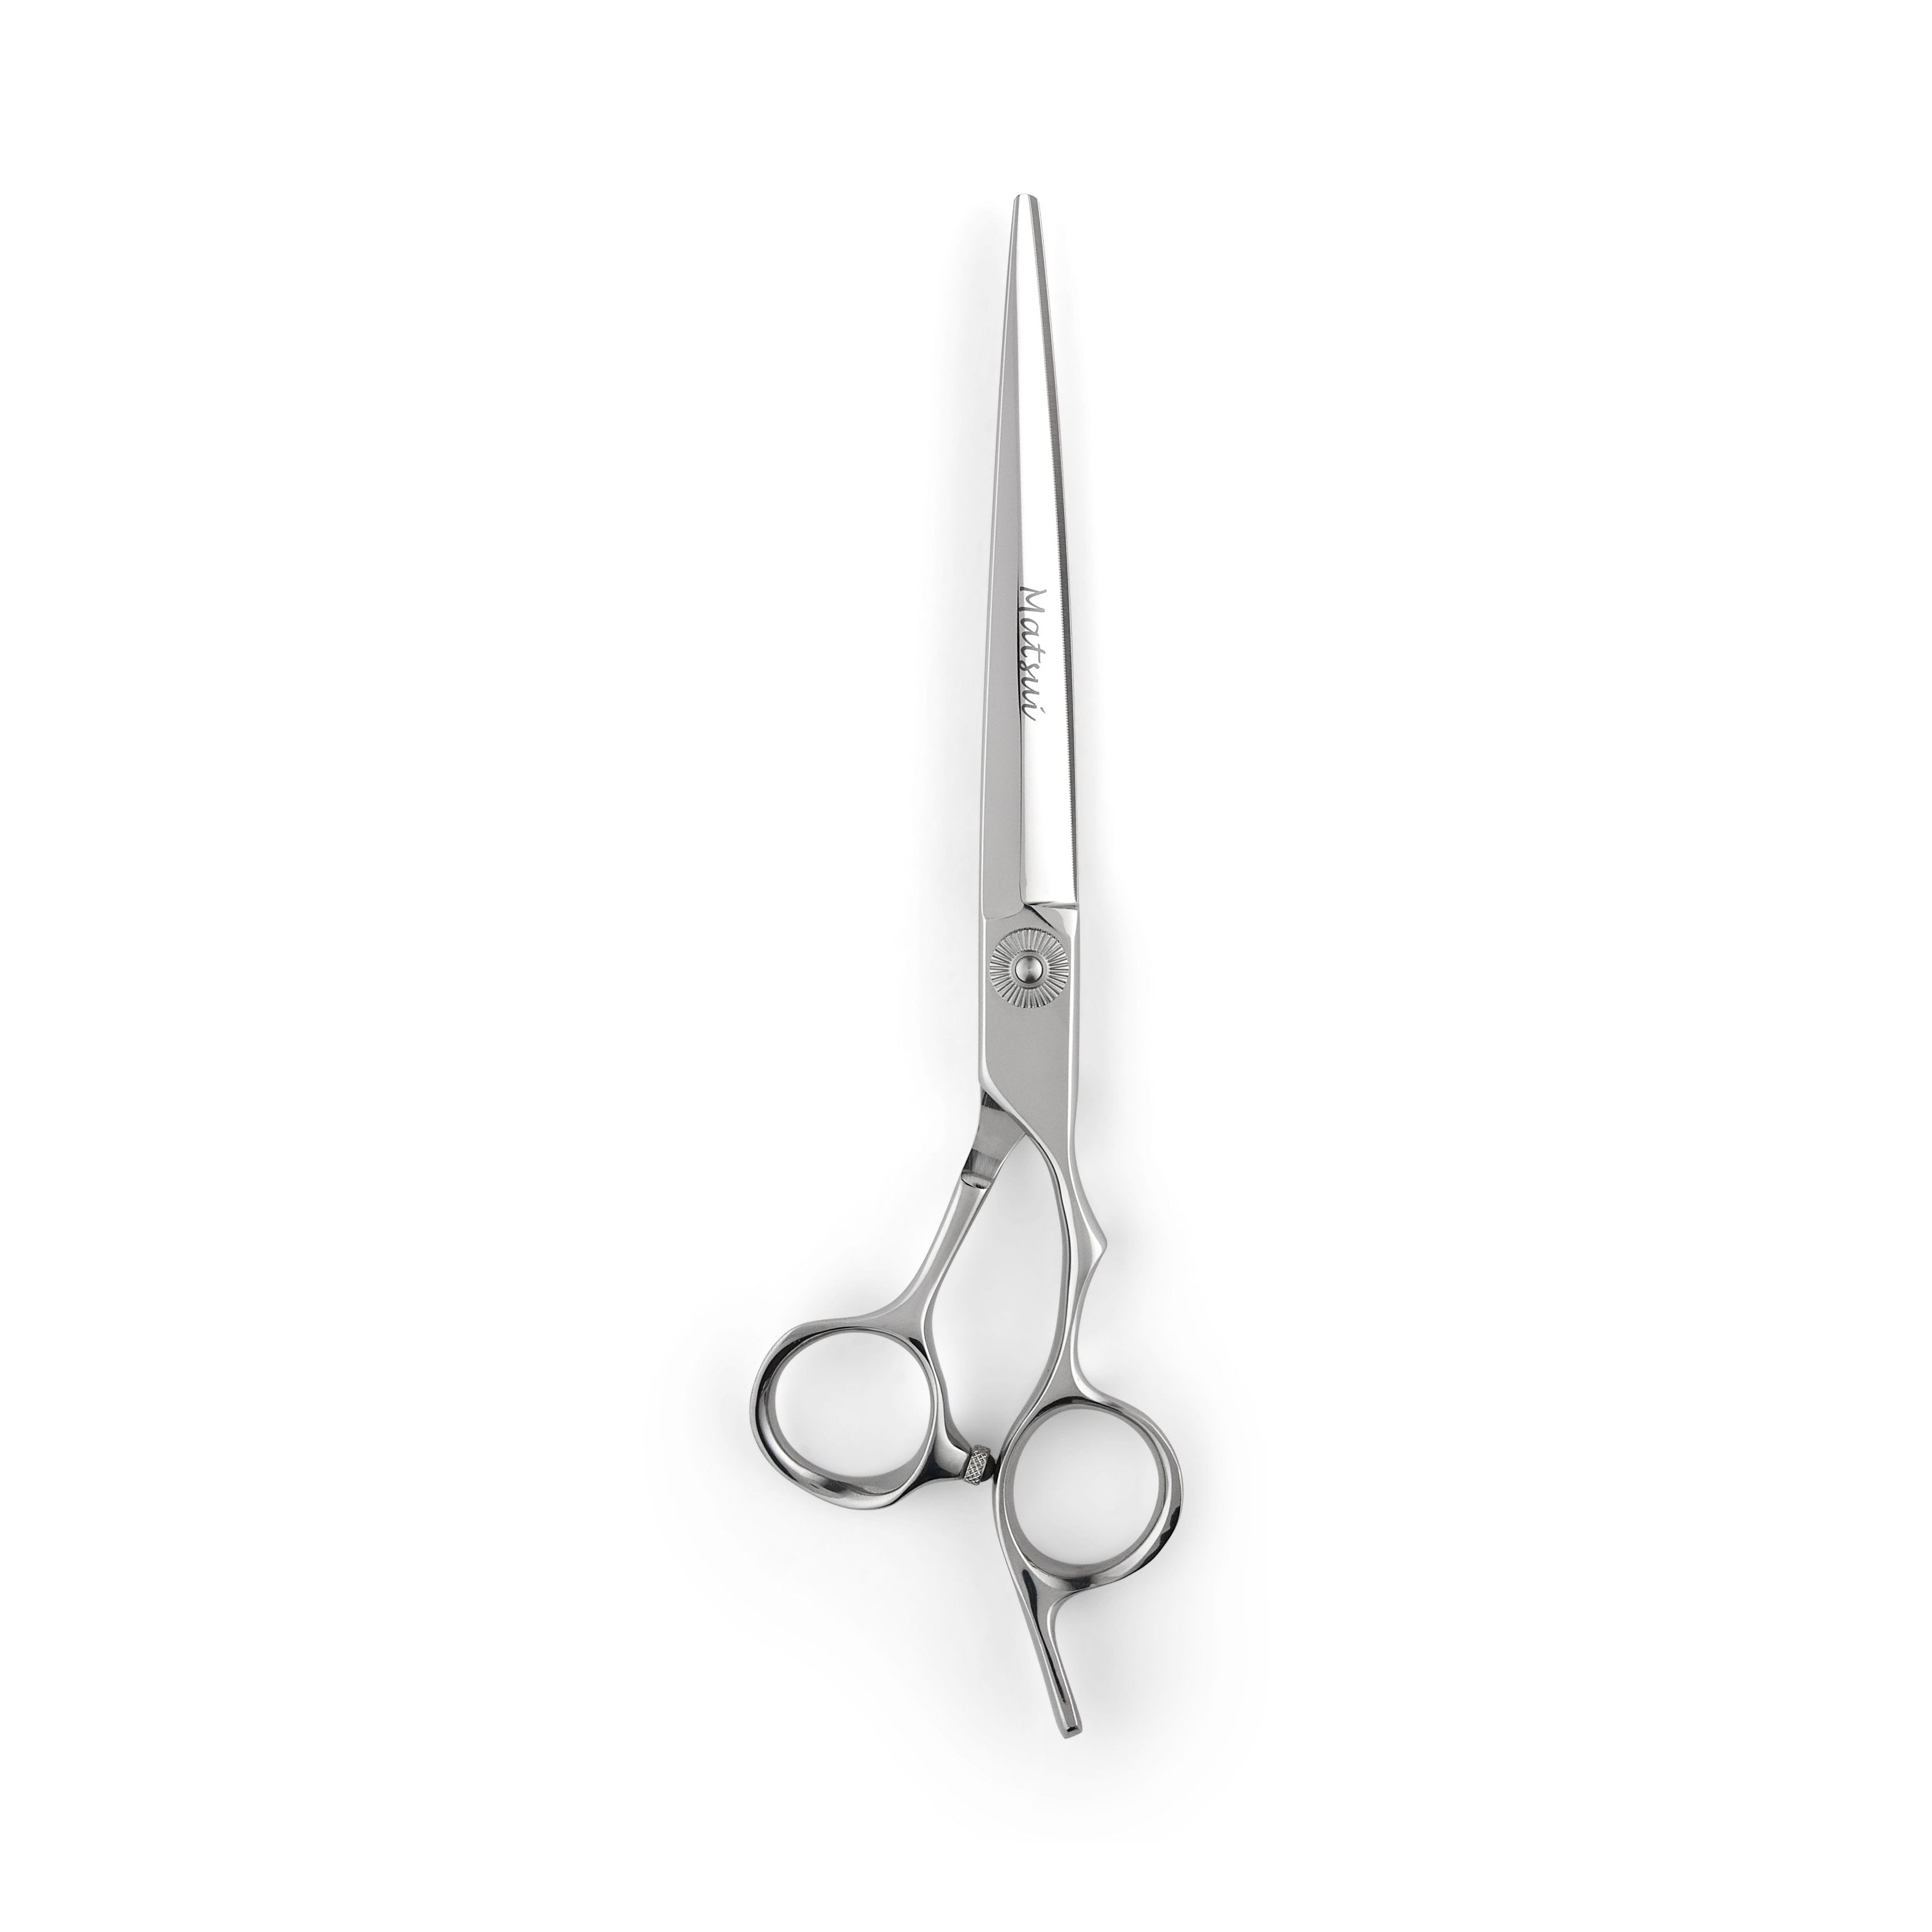 Buy Wholesale skull scissors For Sale, Good For Salons And Home Use 